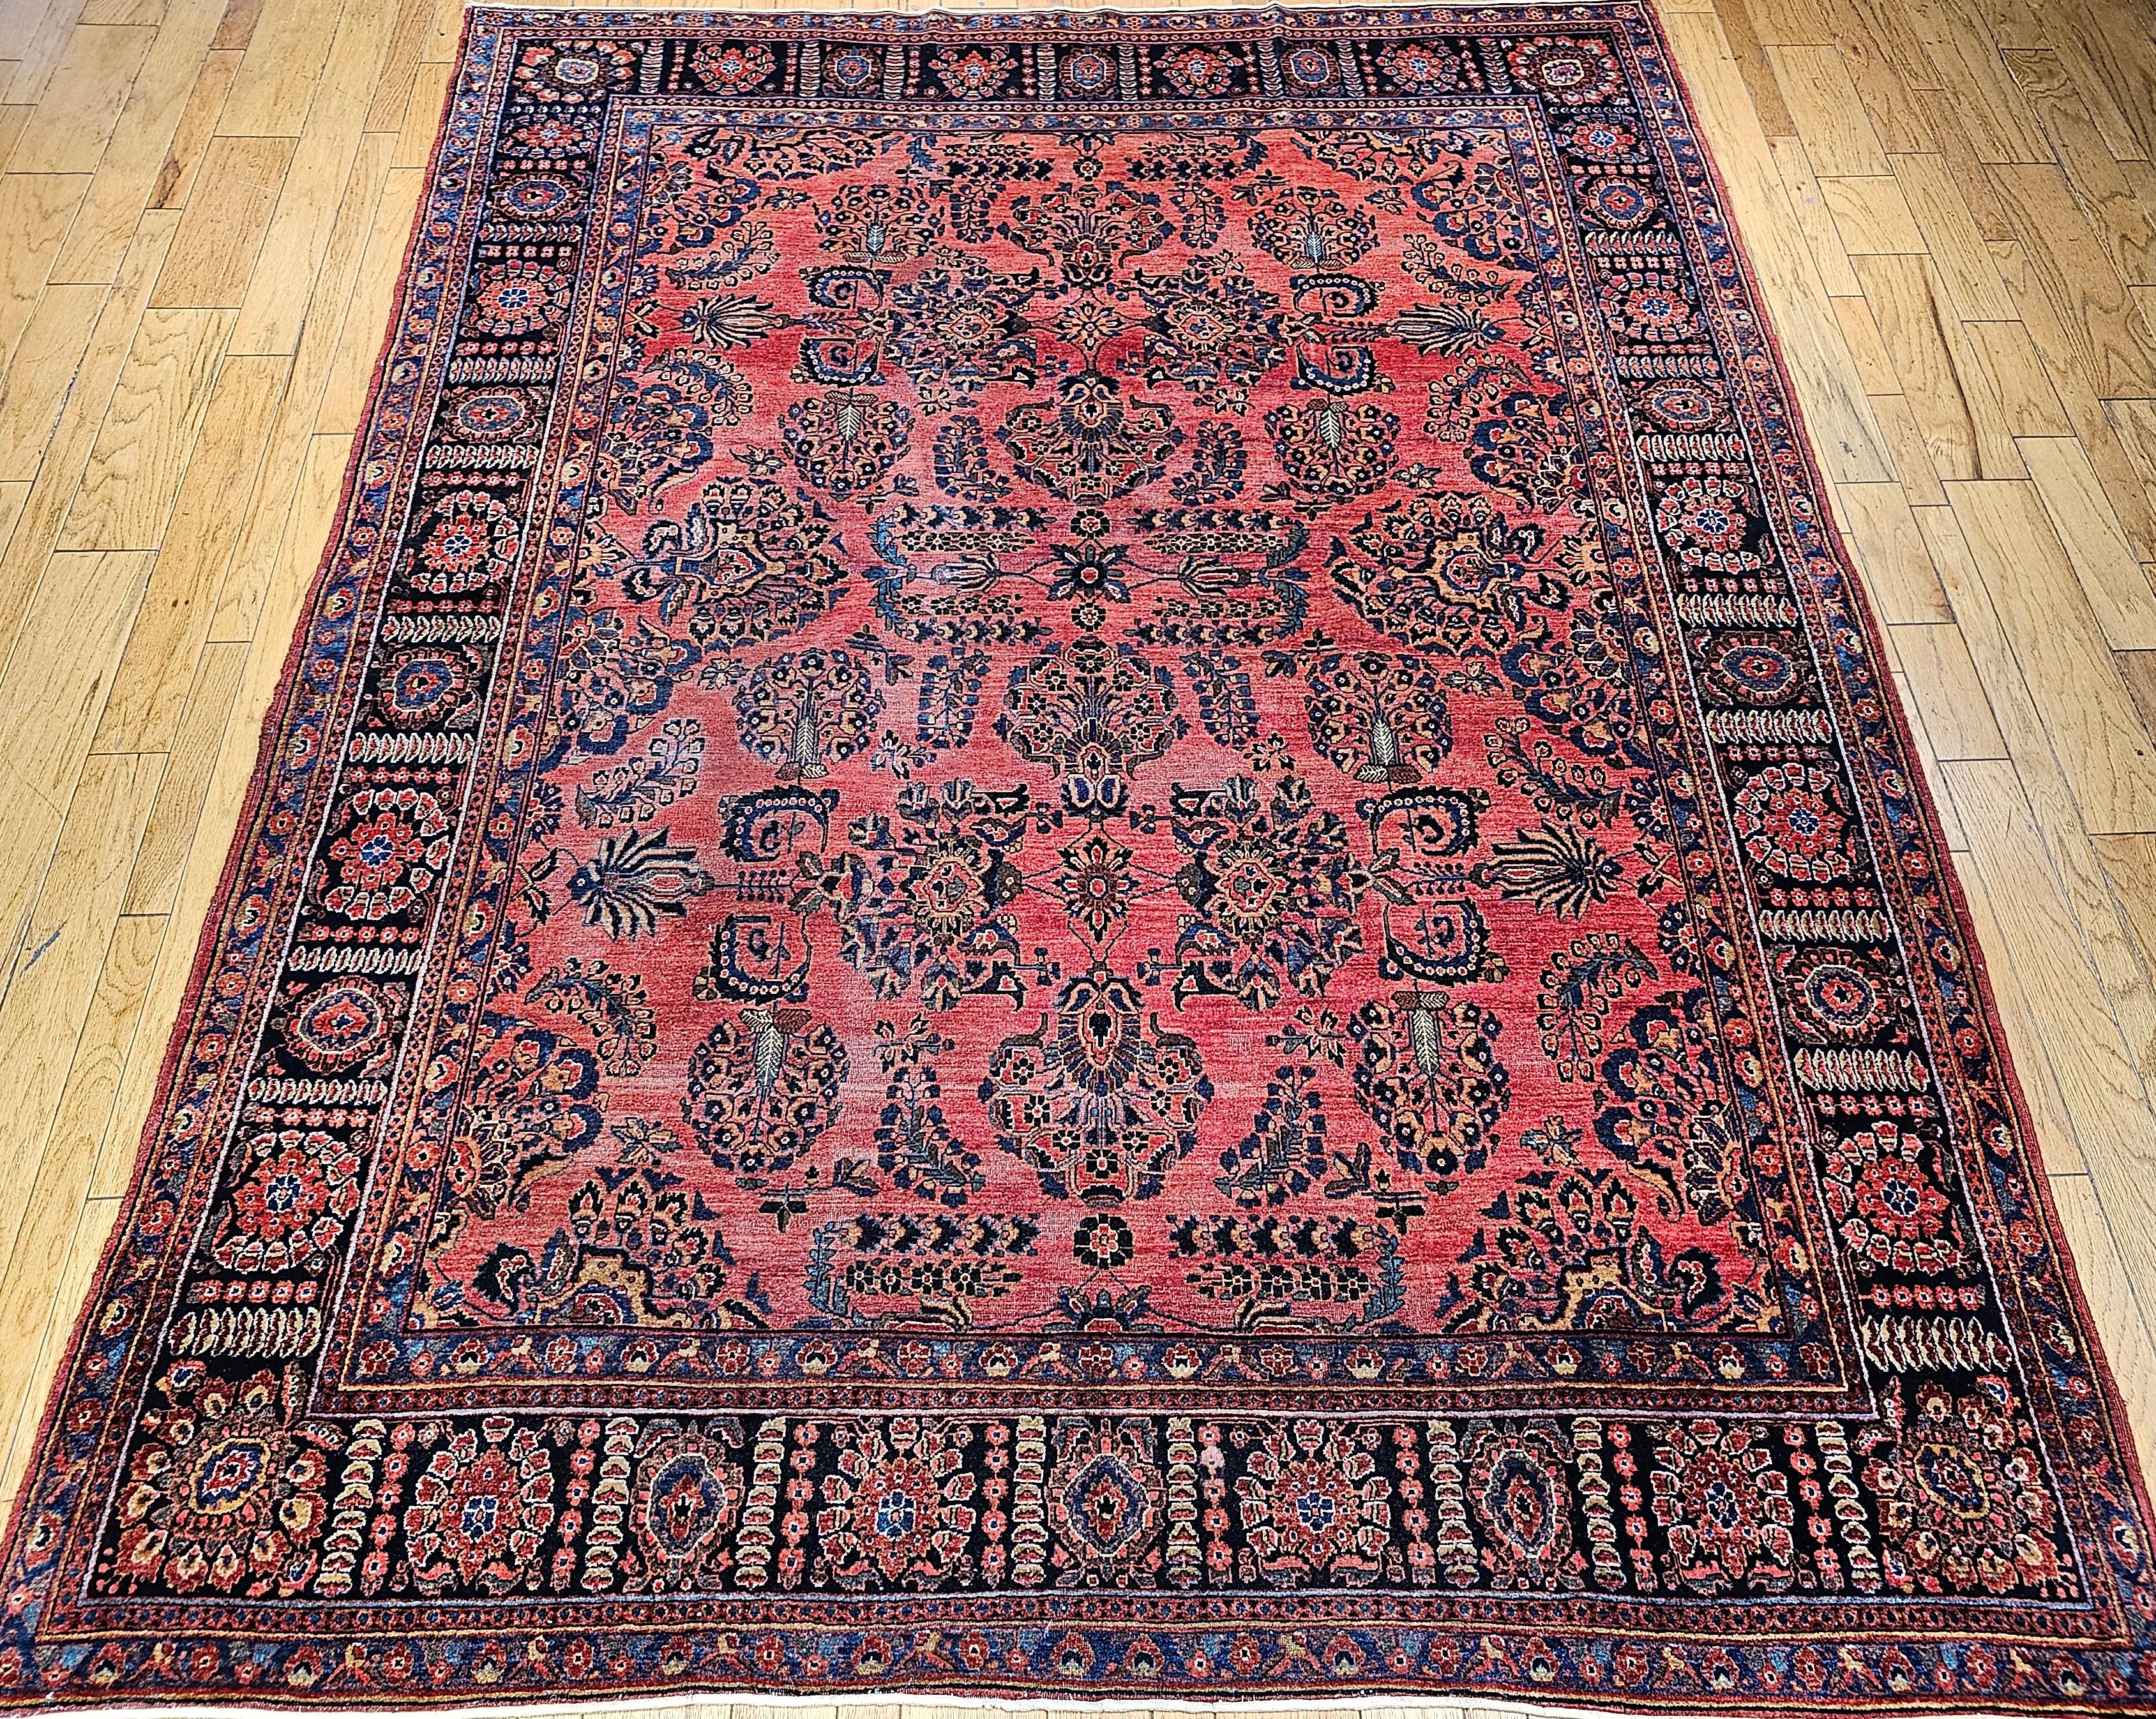 A beautiful hand-knotted Persian Sarouk room size rug from the 1st quarter of the 20th century.  The rug is distinct in having an open and uncluttered allover design field consisting of large flower bouquet forms set on a dark red background.   The